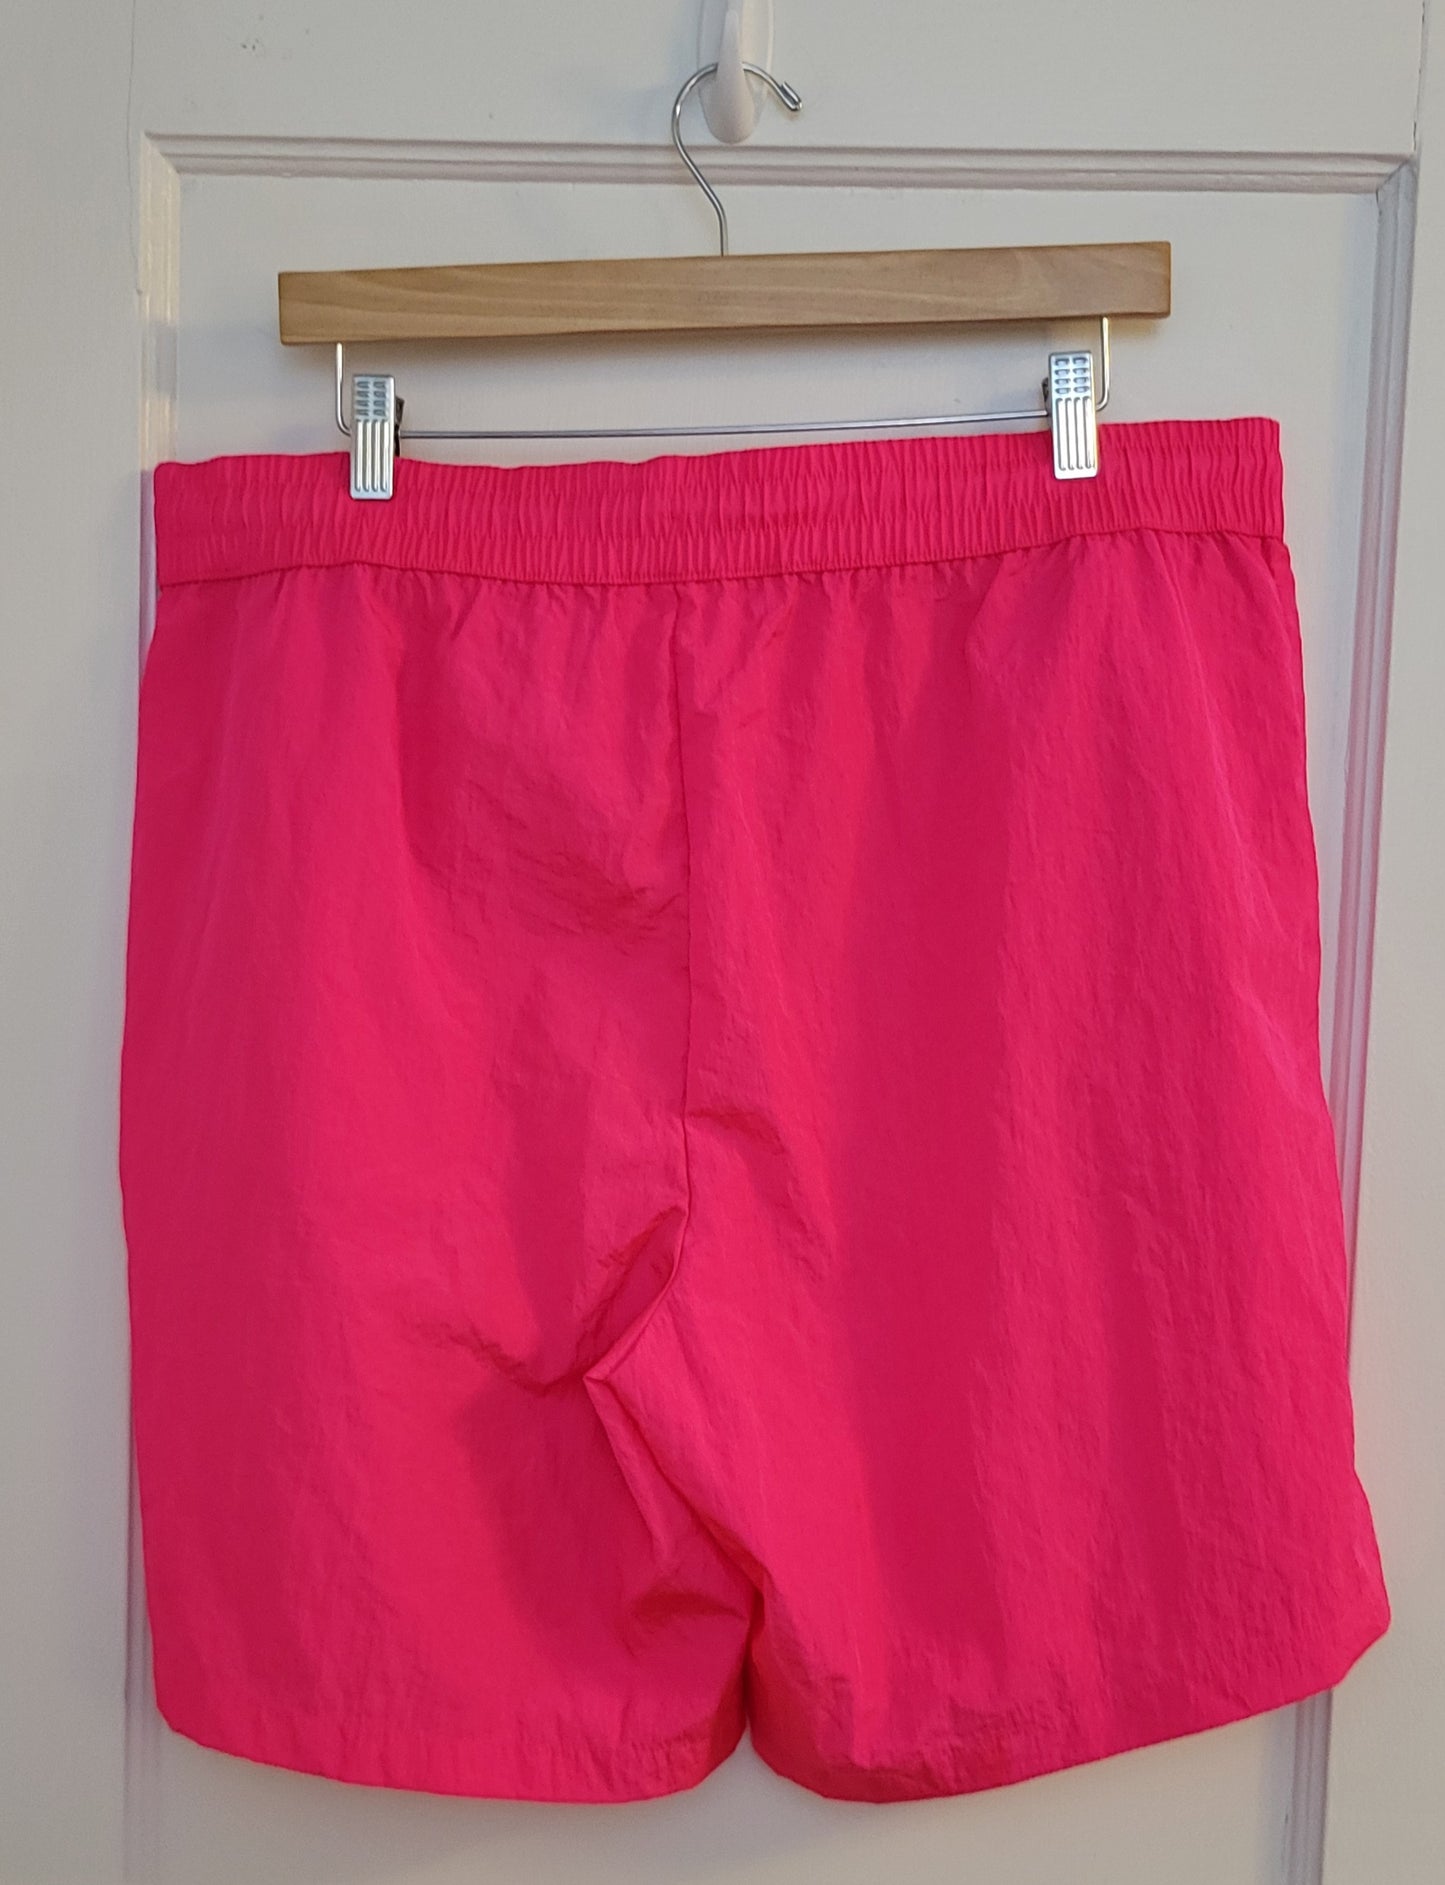 Future Collective (Target) Hot Pink 90s Style Shorts, Women's Size XL NEW WITH TAGS